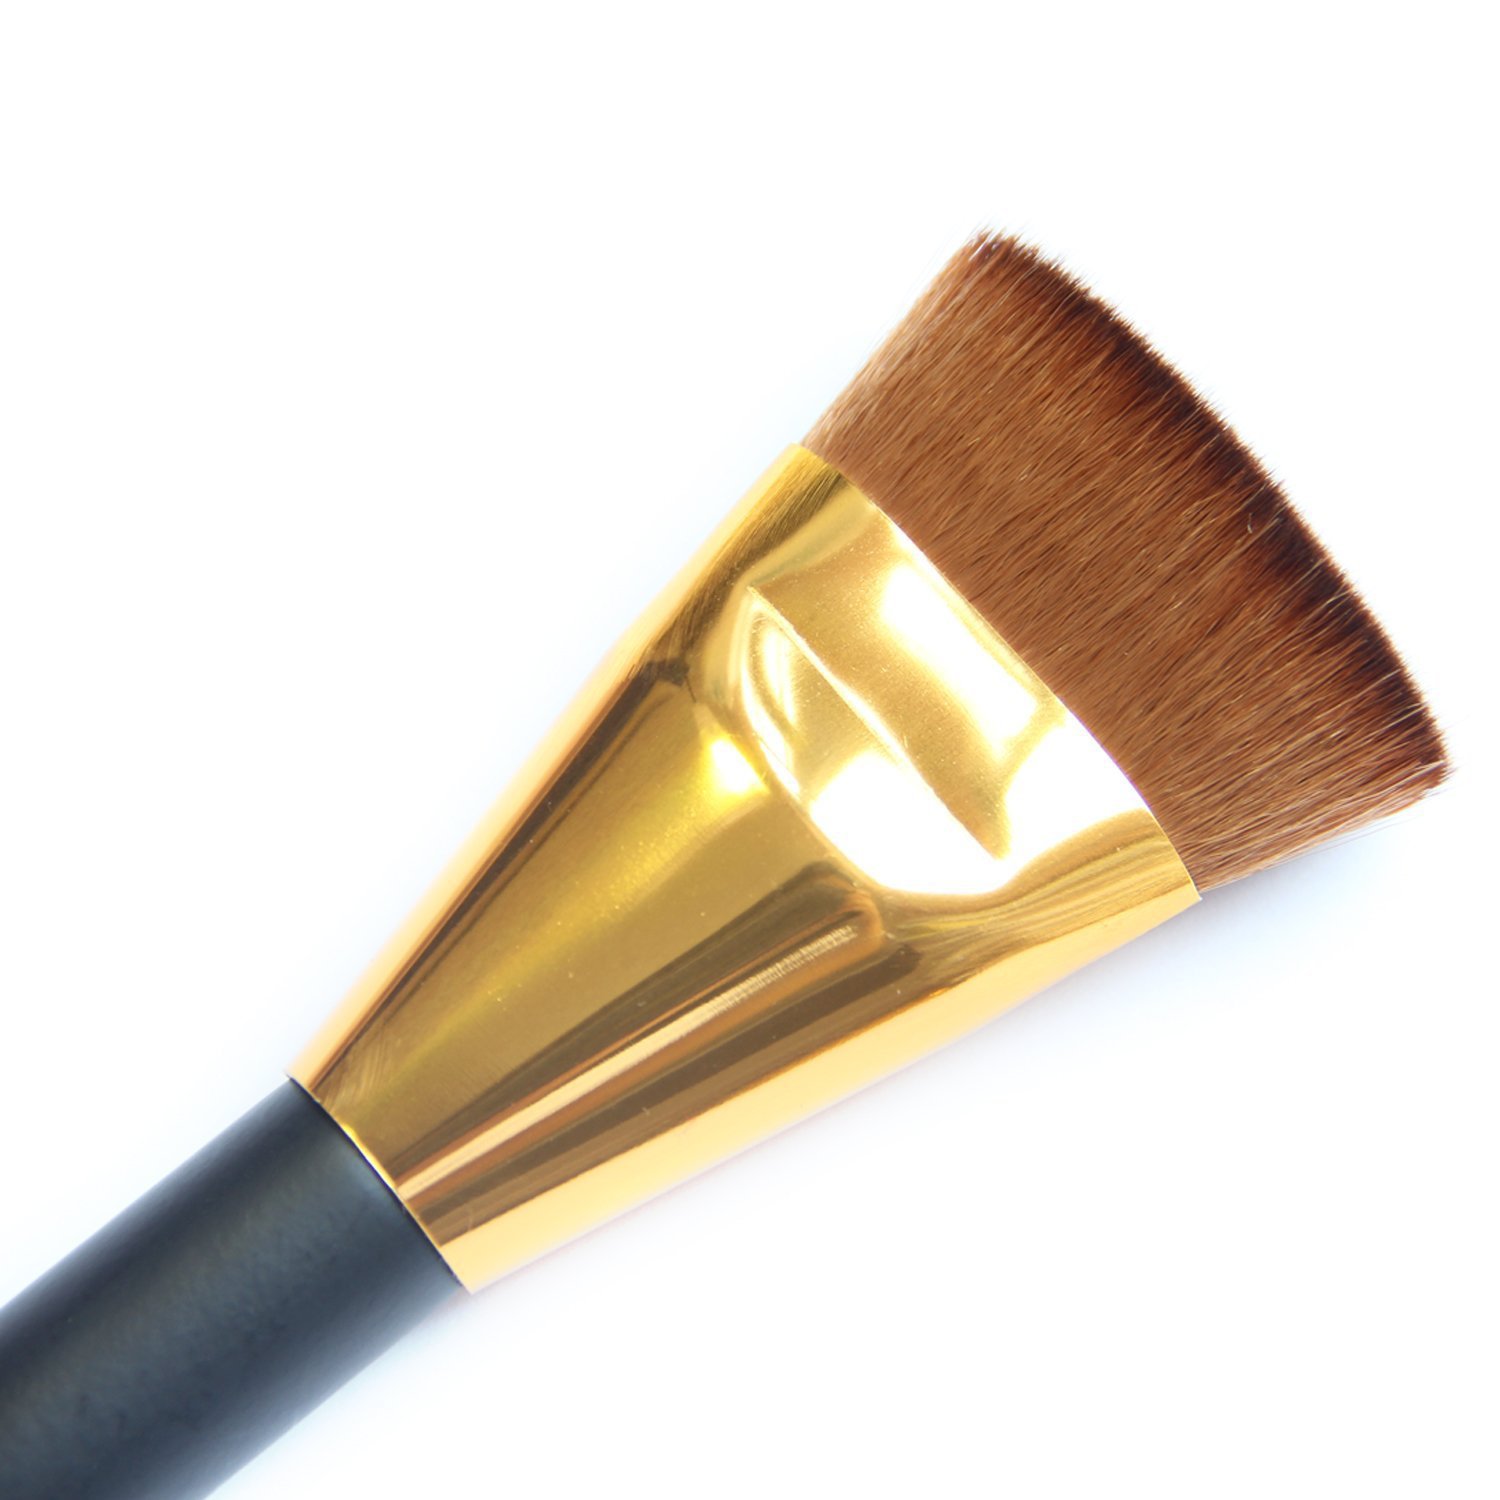 The best contour brushes for the cream powder